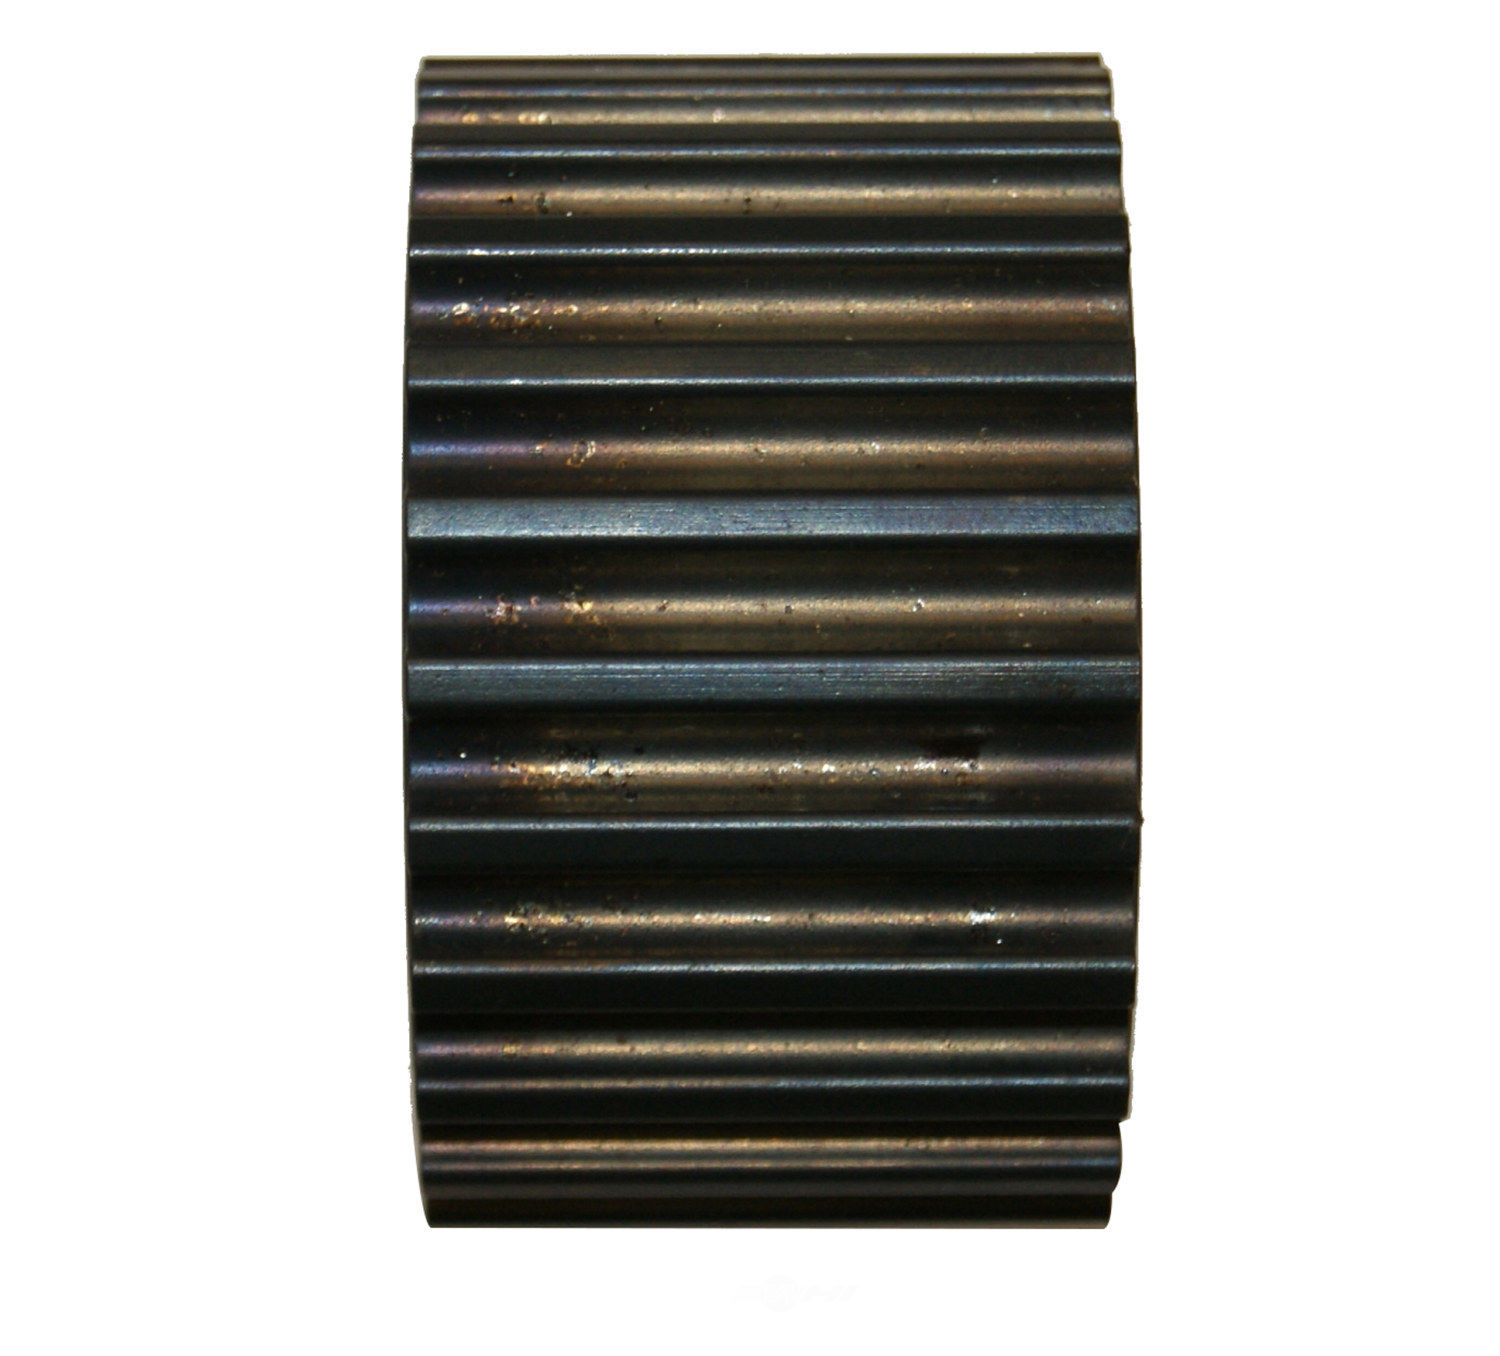 GMB - Engine Timing Belt Idler Pulley (Right) - GMB 460-9130